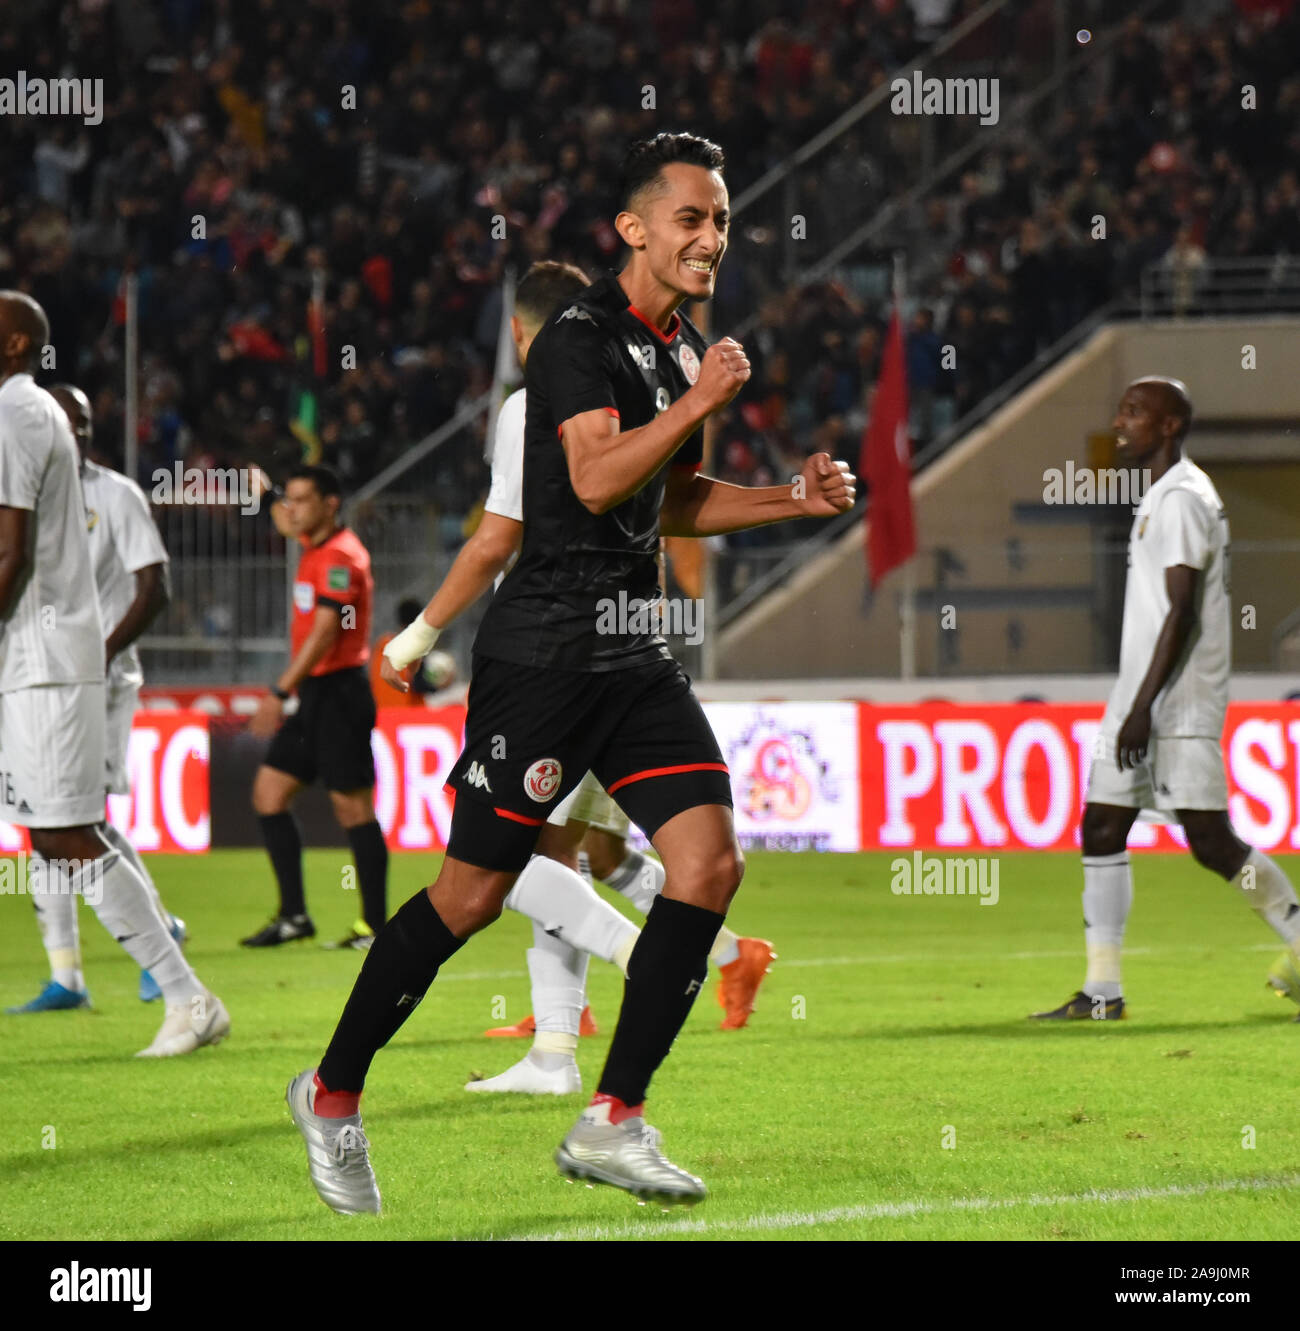 Tunis, Tunisia. 15th Nov, 2019. Tunisia's midfielder Saif-Eddine Khaoui celebrates after scoring a goal during the 2021 Africa Cup of Nations group J qualifying football match between Tunisia and Libya at the Stade Olympique de Rades.(Final score; Tunisia 4:1 Libya) Credit: SOPA Images Limited/Alamy Live News Stock Photo